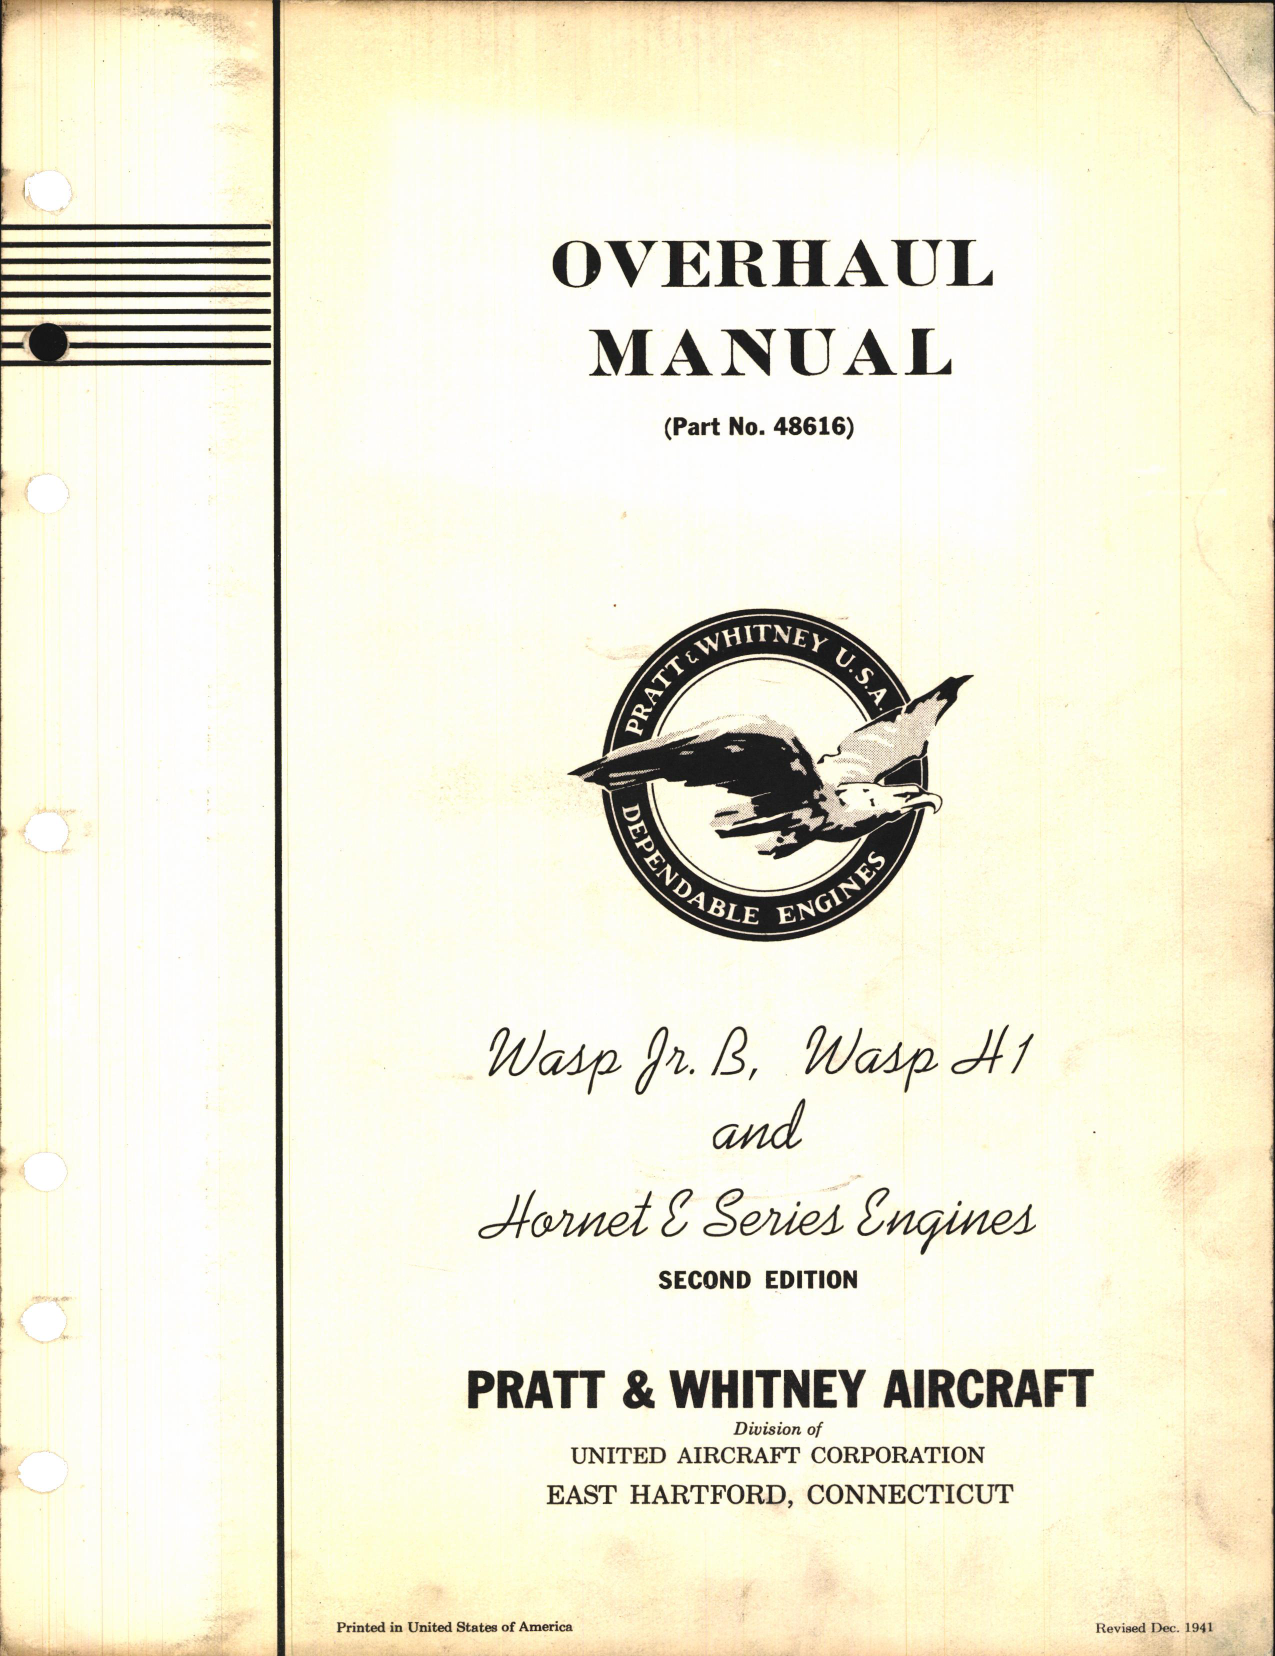 Sample page 1 from AirCorps Library document: Overhaul Manual for Wasp Jr B, Wasp H1, and Hornet E Series Engines